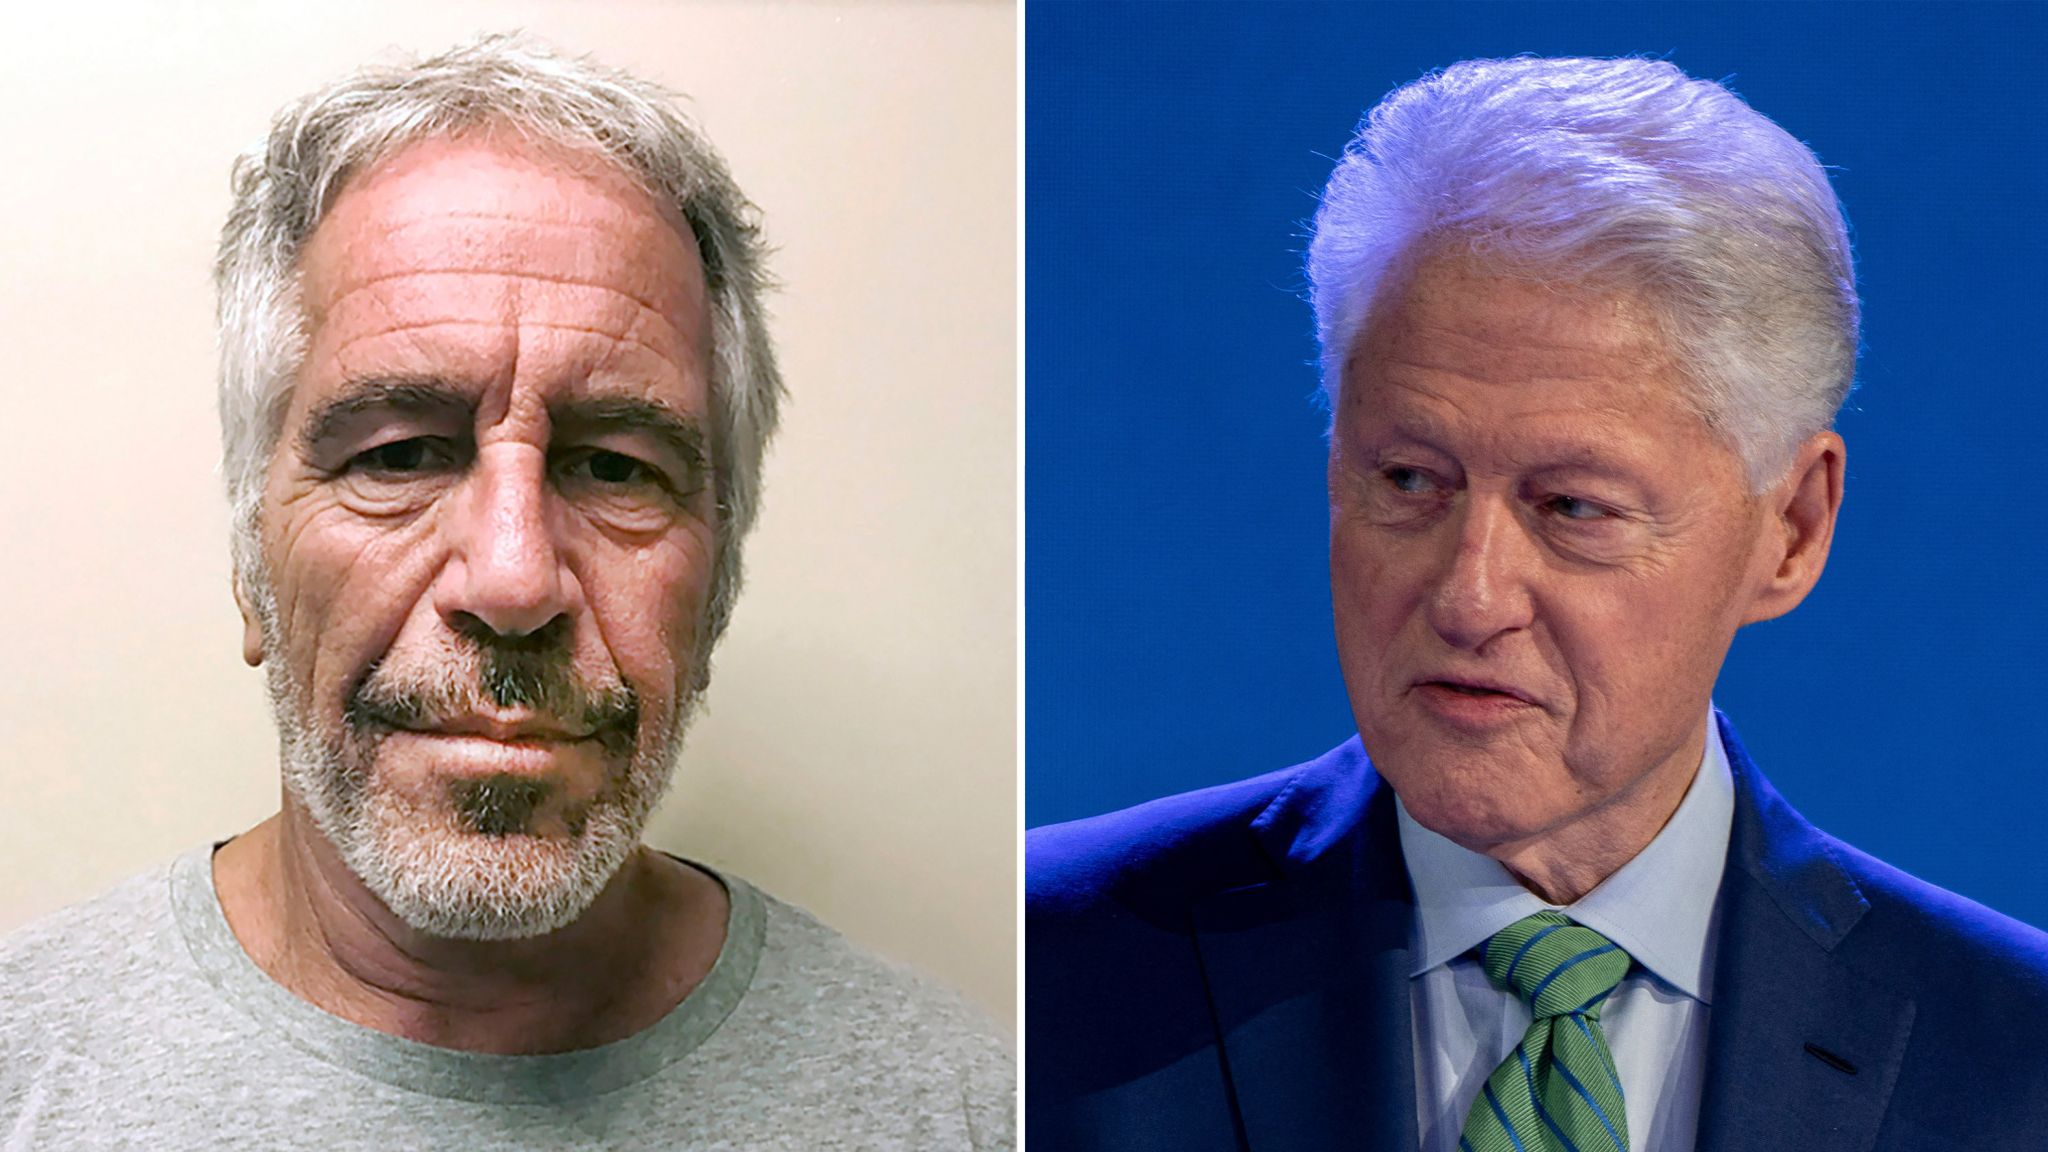 Bill Clinton 'threatened' magazine not to publish articles about his 'good friend' Jeffrey Epstein